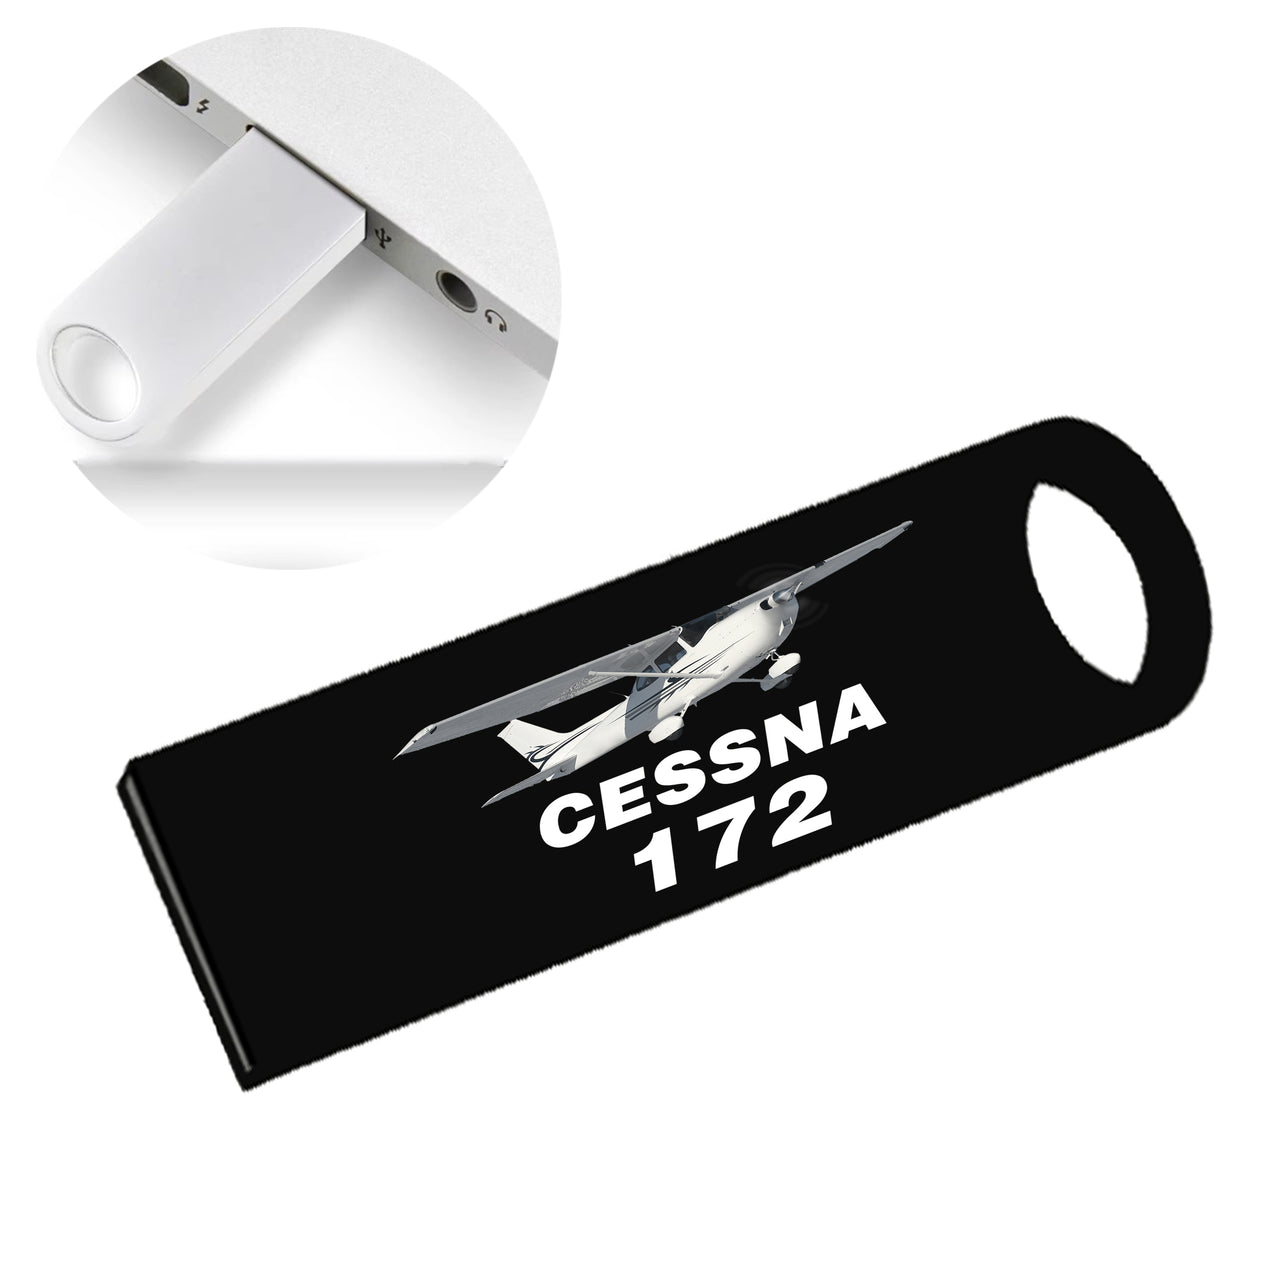 The Cessna 172 Designed Waterproof USB Devices